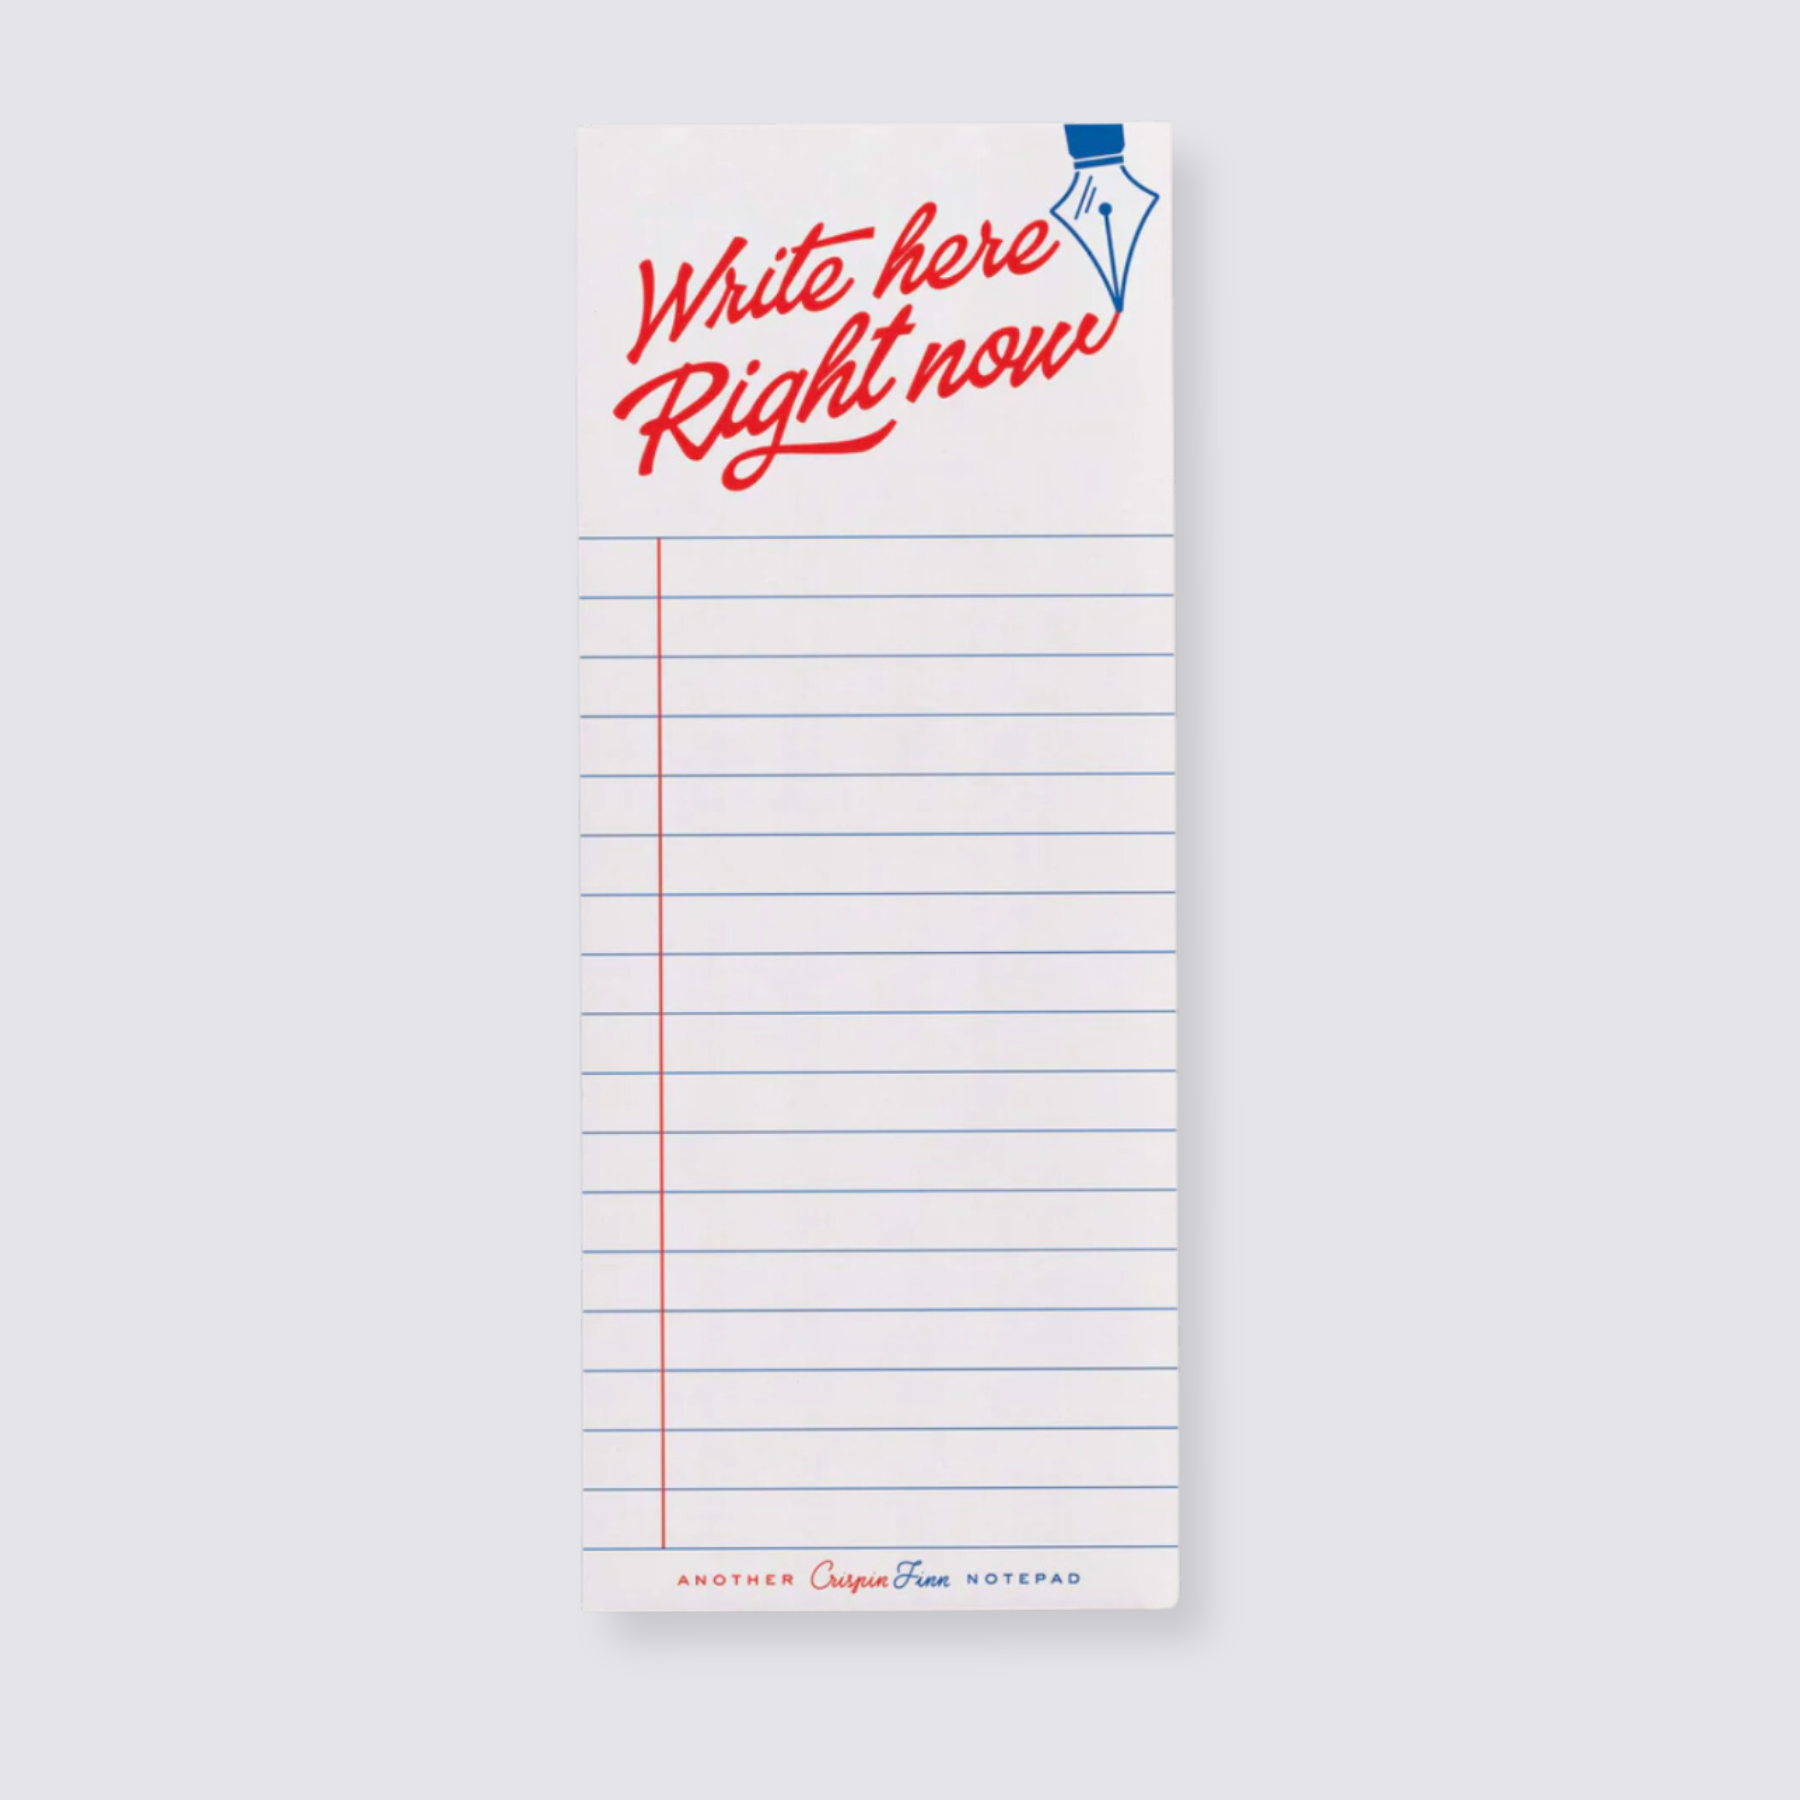 Write here right now note pad